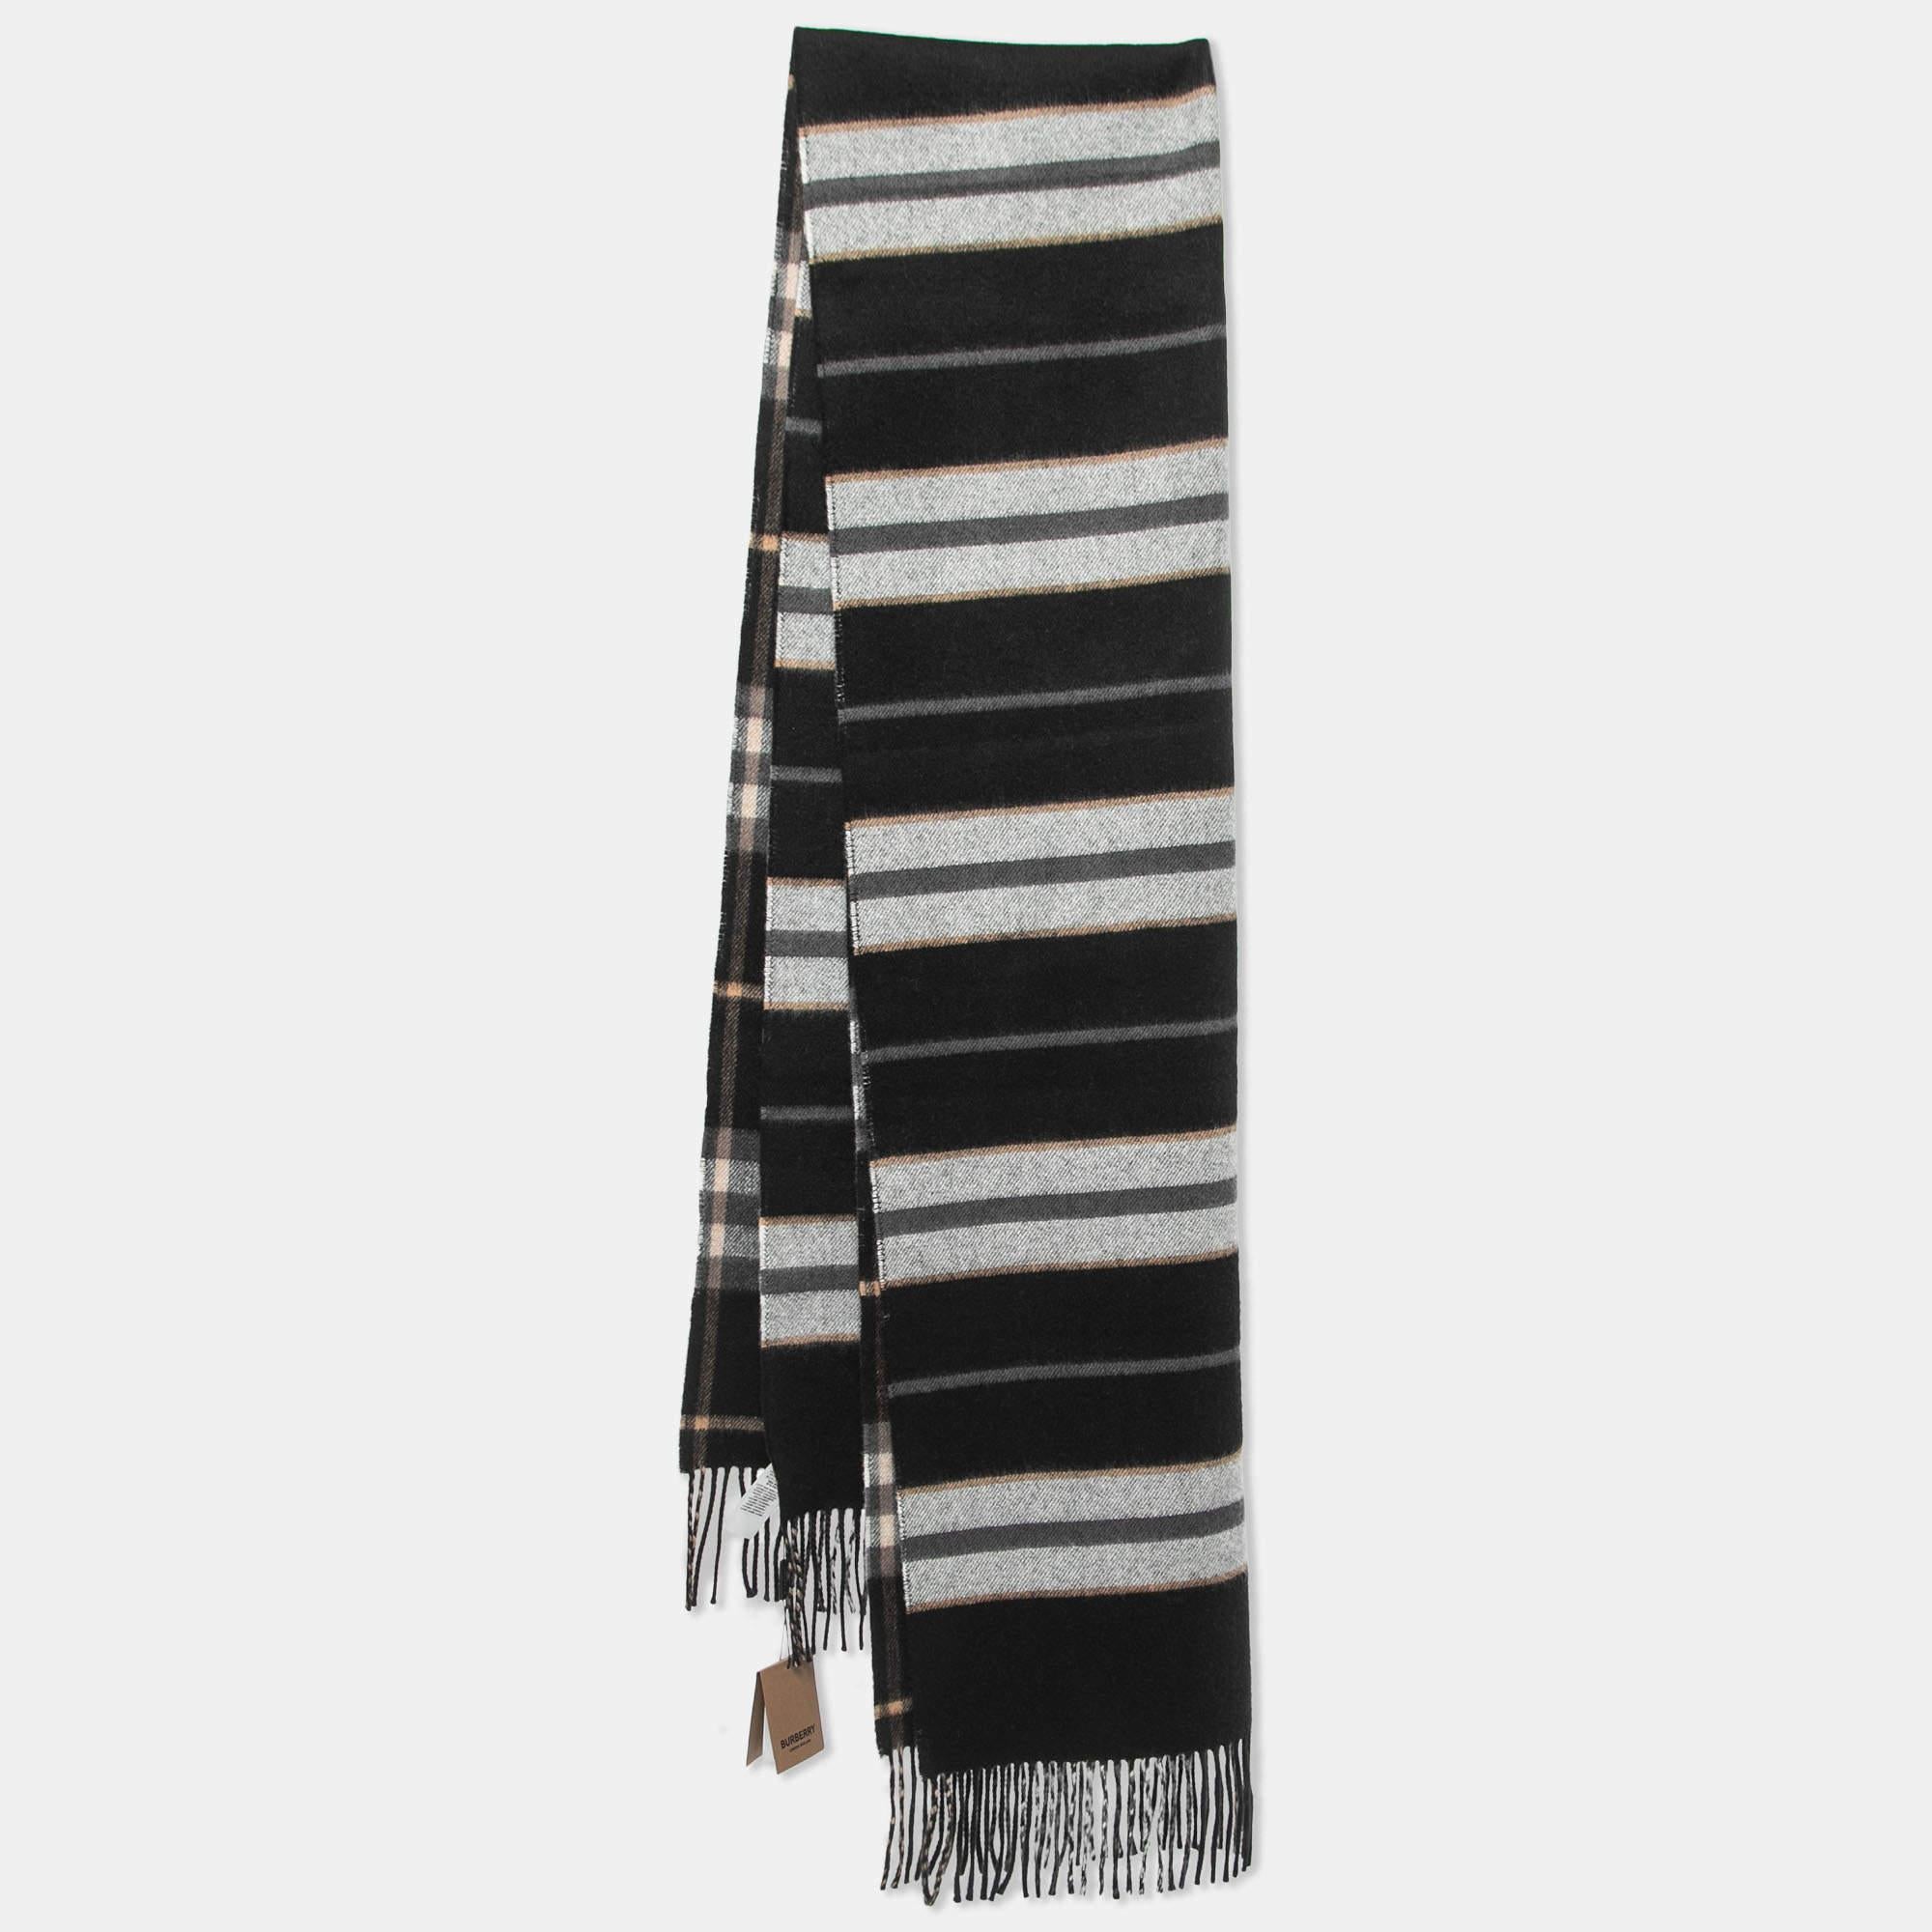 Classy and stylish are some words that come to our minds when we have a look at the scarf. The label brings you this versatile creation made from luxurious materials that you style with many outfits.

Includes: Price Tag